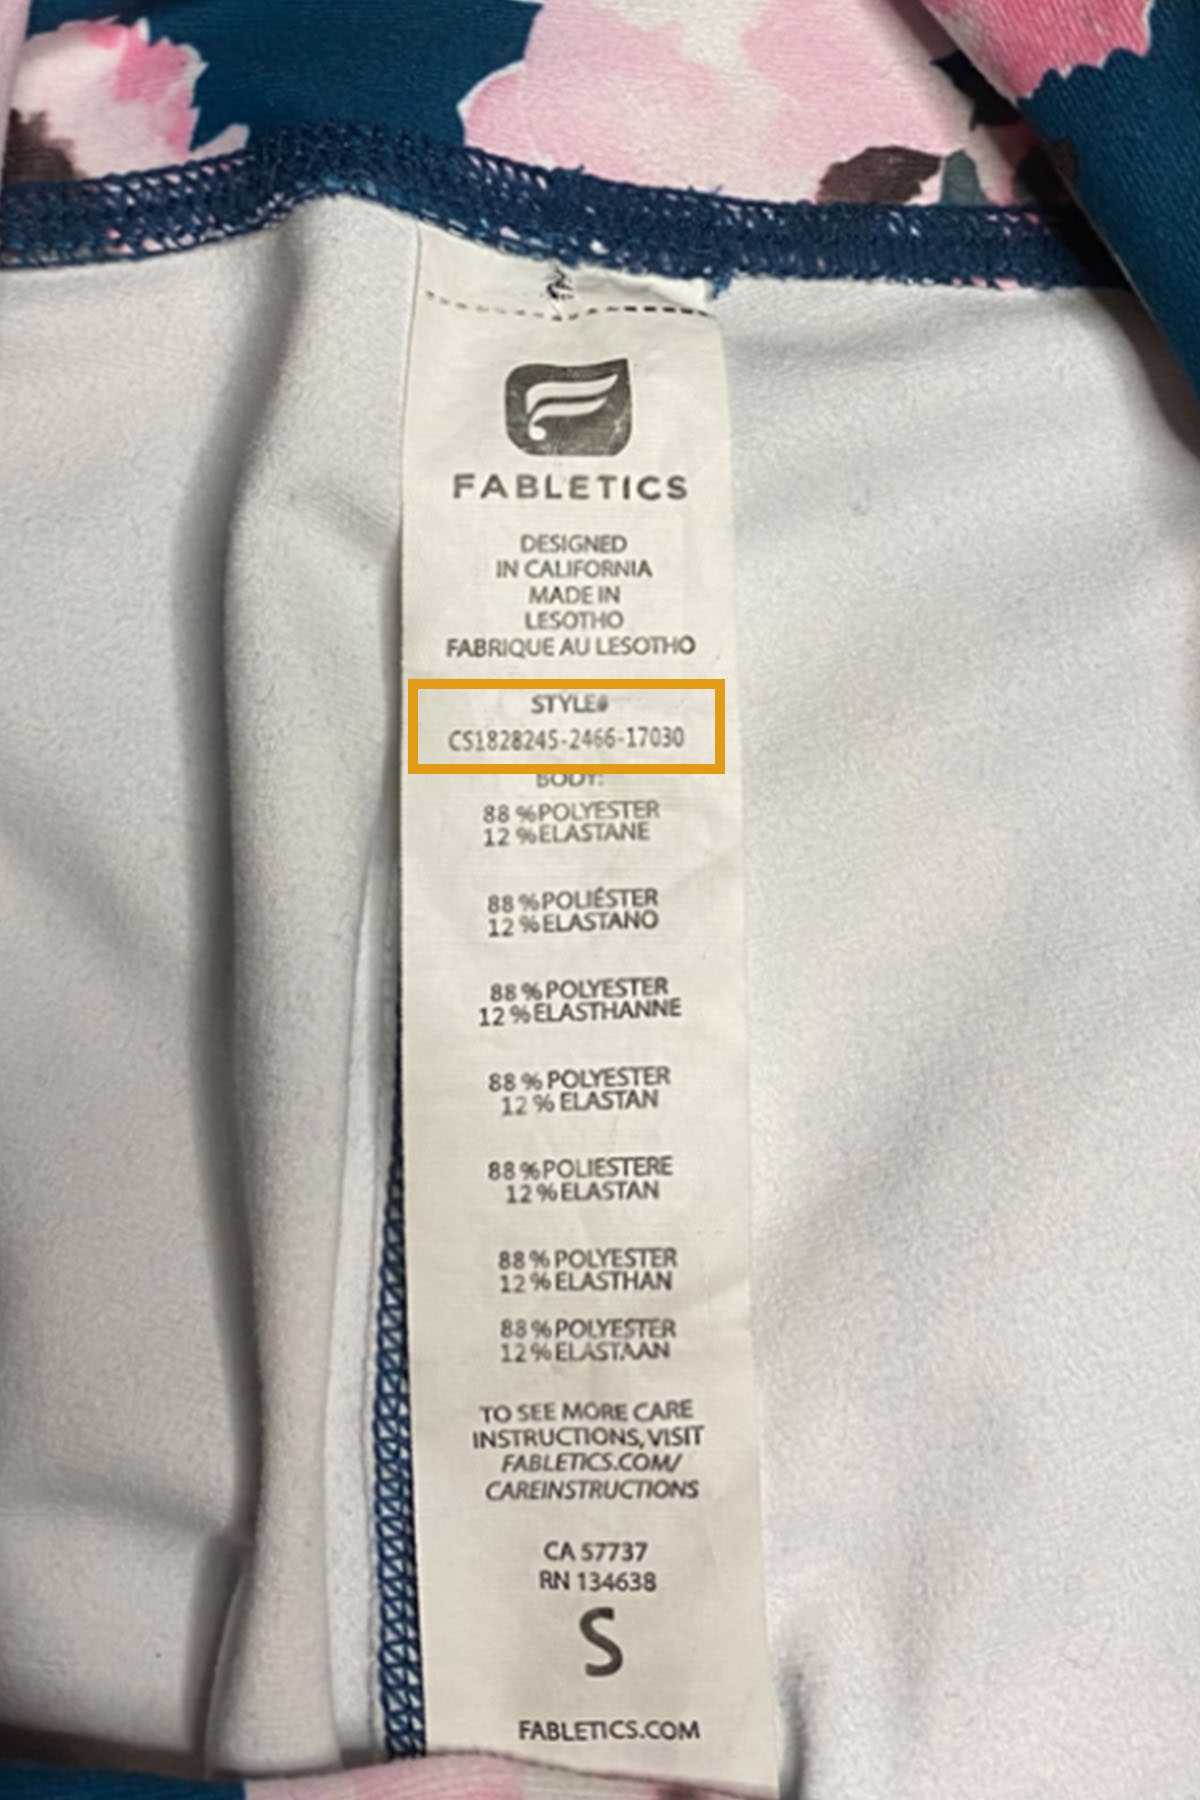 a close up of a fabletics style number tag.